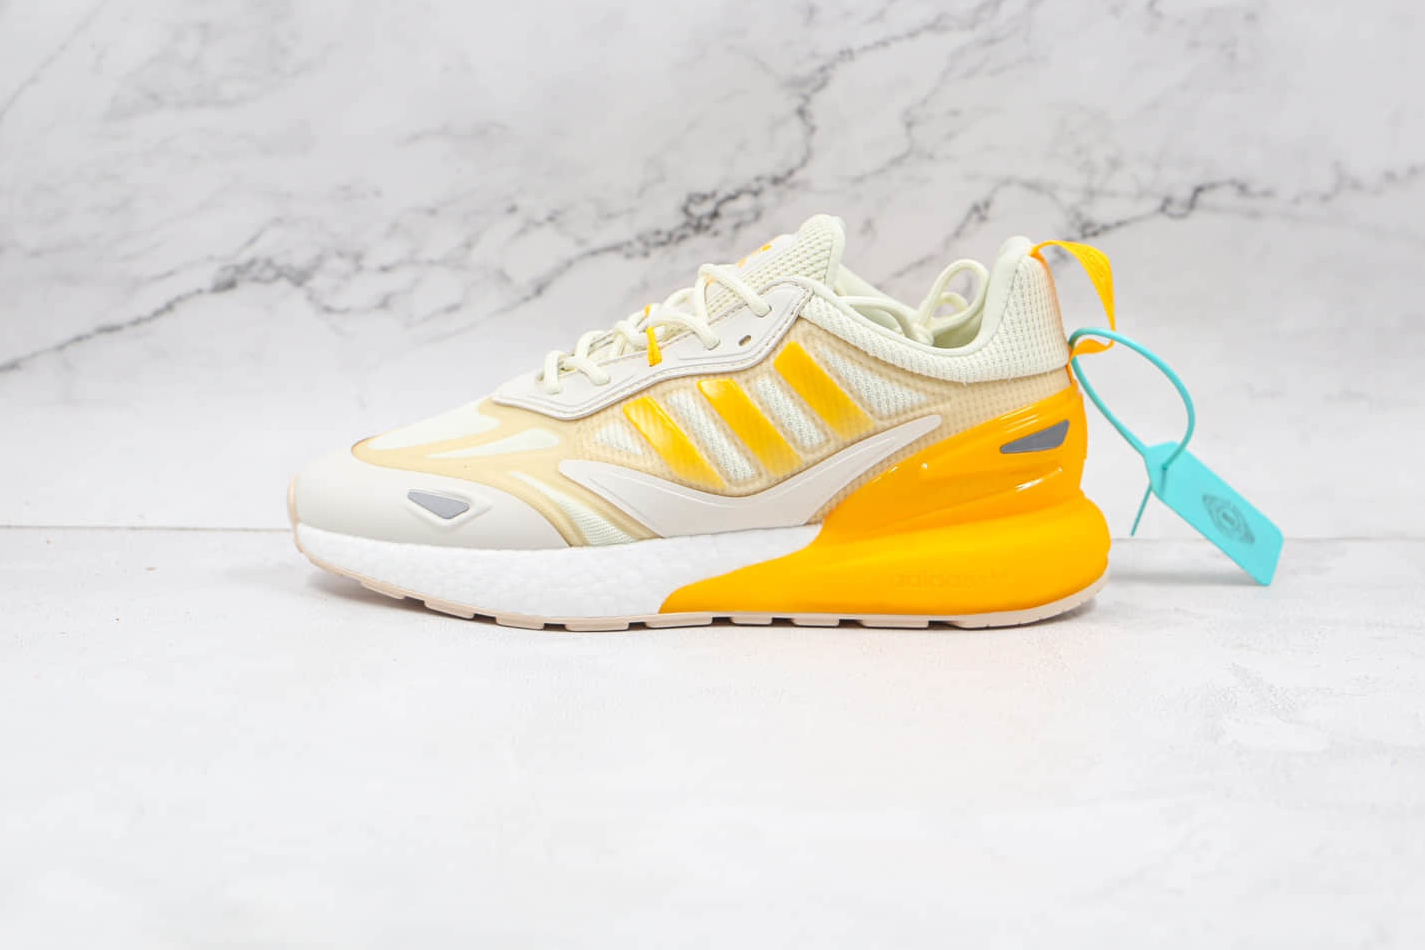 Adidas Originals ZX 2K Boost 2.0 'Wonder White Orange Tint' GZ7823 - Stylish and Comfy Sneakers for Men